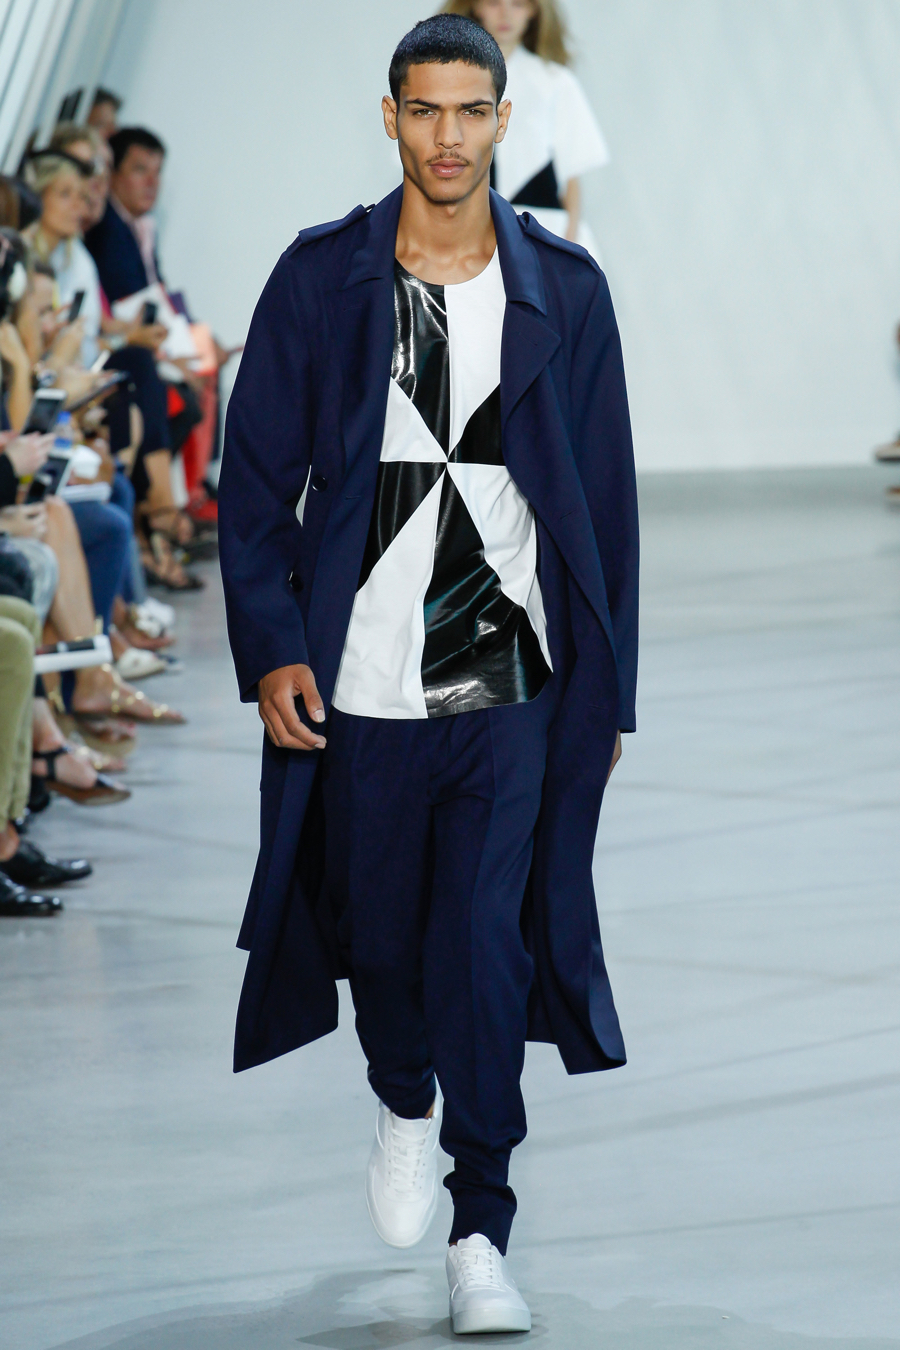 Lacoste Spring Summer 2016 Menswear Collection New York Fashion Week 009